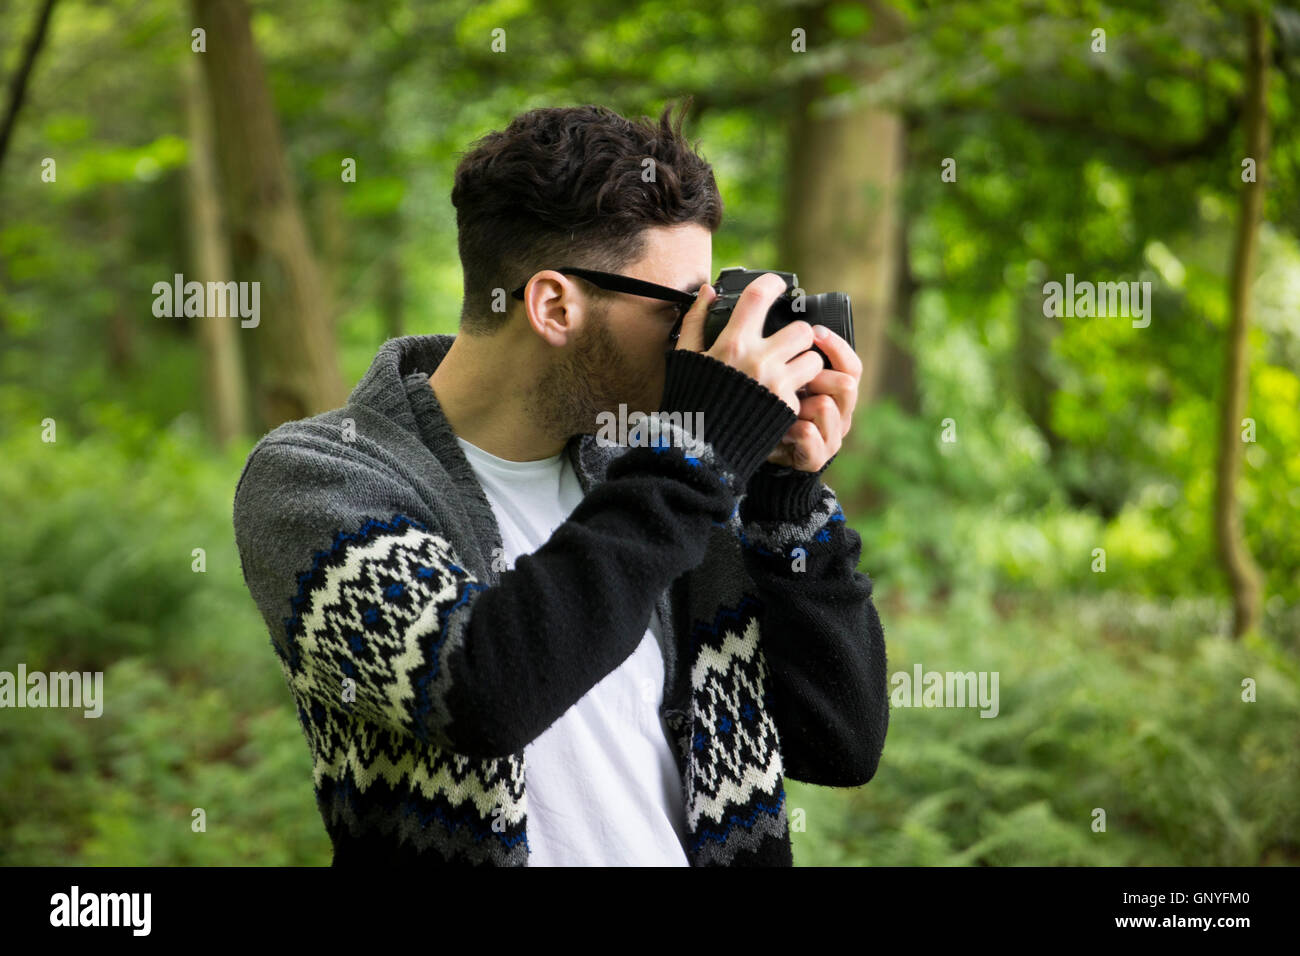 Portrait of man taking landscape photos with a DSLR in a forest. Caucasian Photographer shooting outside with digital camera. Stock Photo